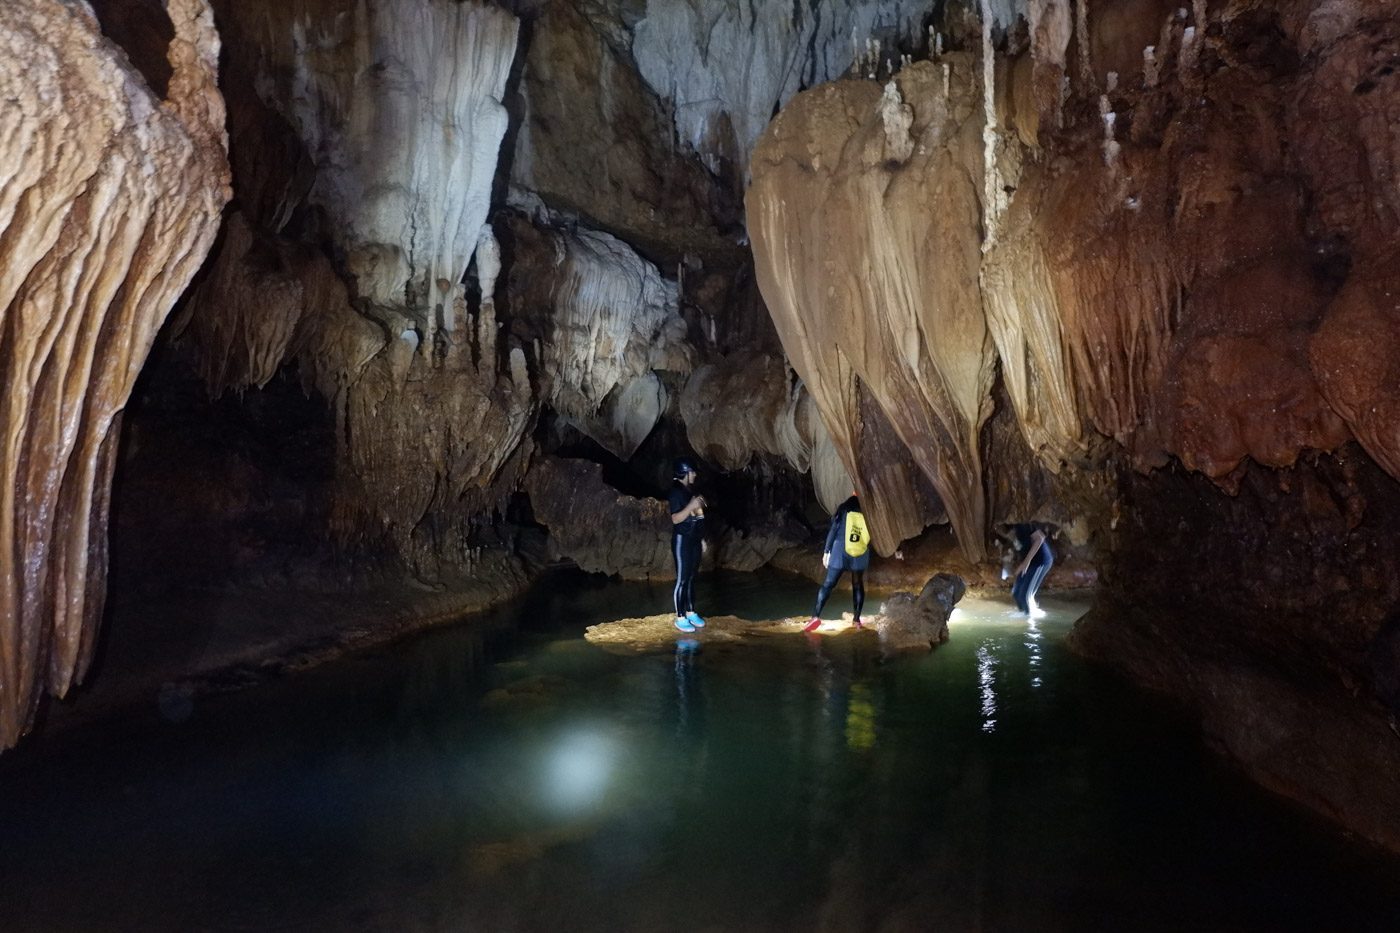 DIVERSITY. Capisaan Cave has an interesting diversity of stalactites, stalagmites, and other formations. Paula Anntoneth O 